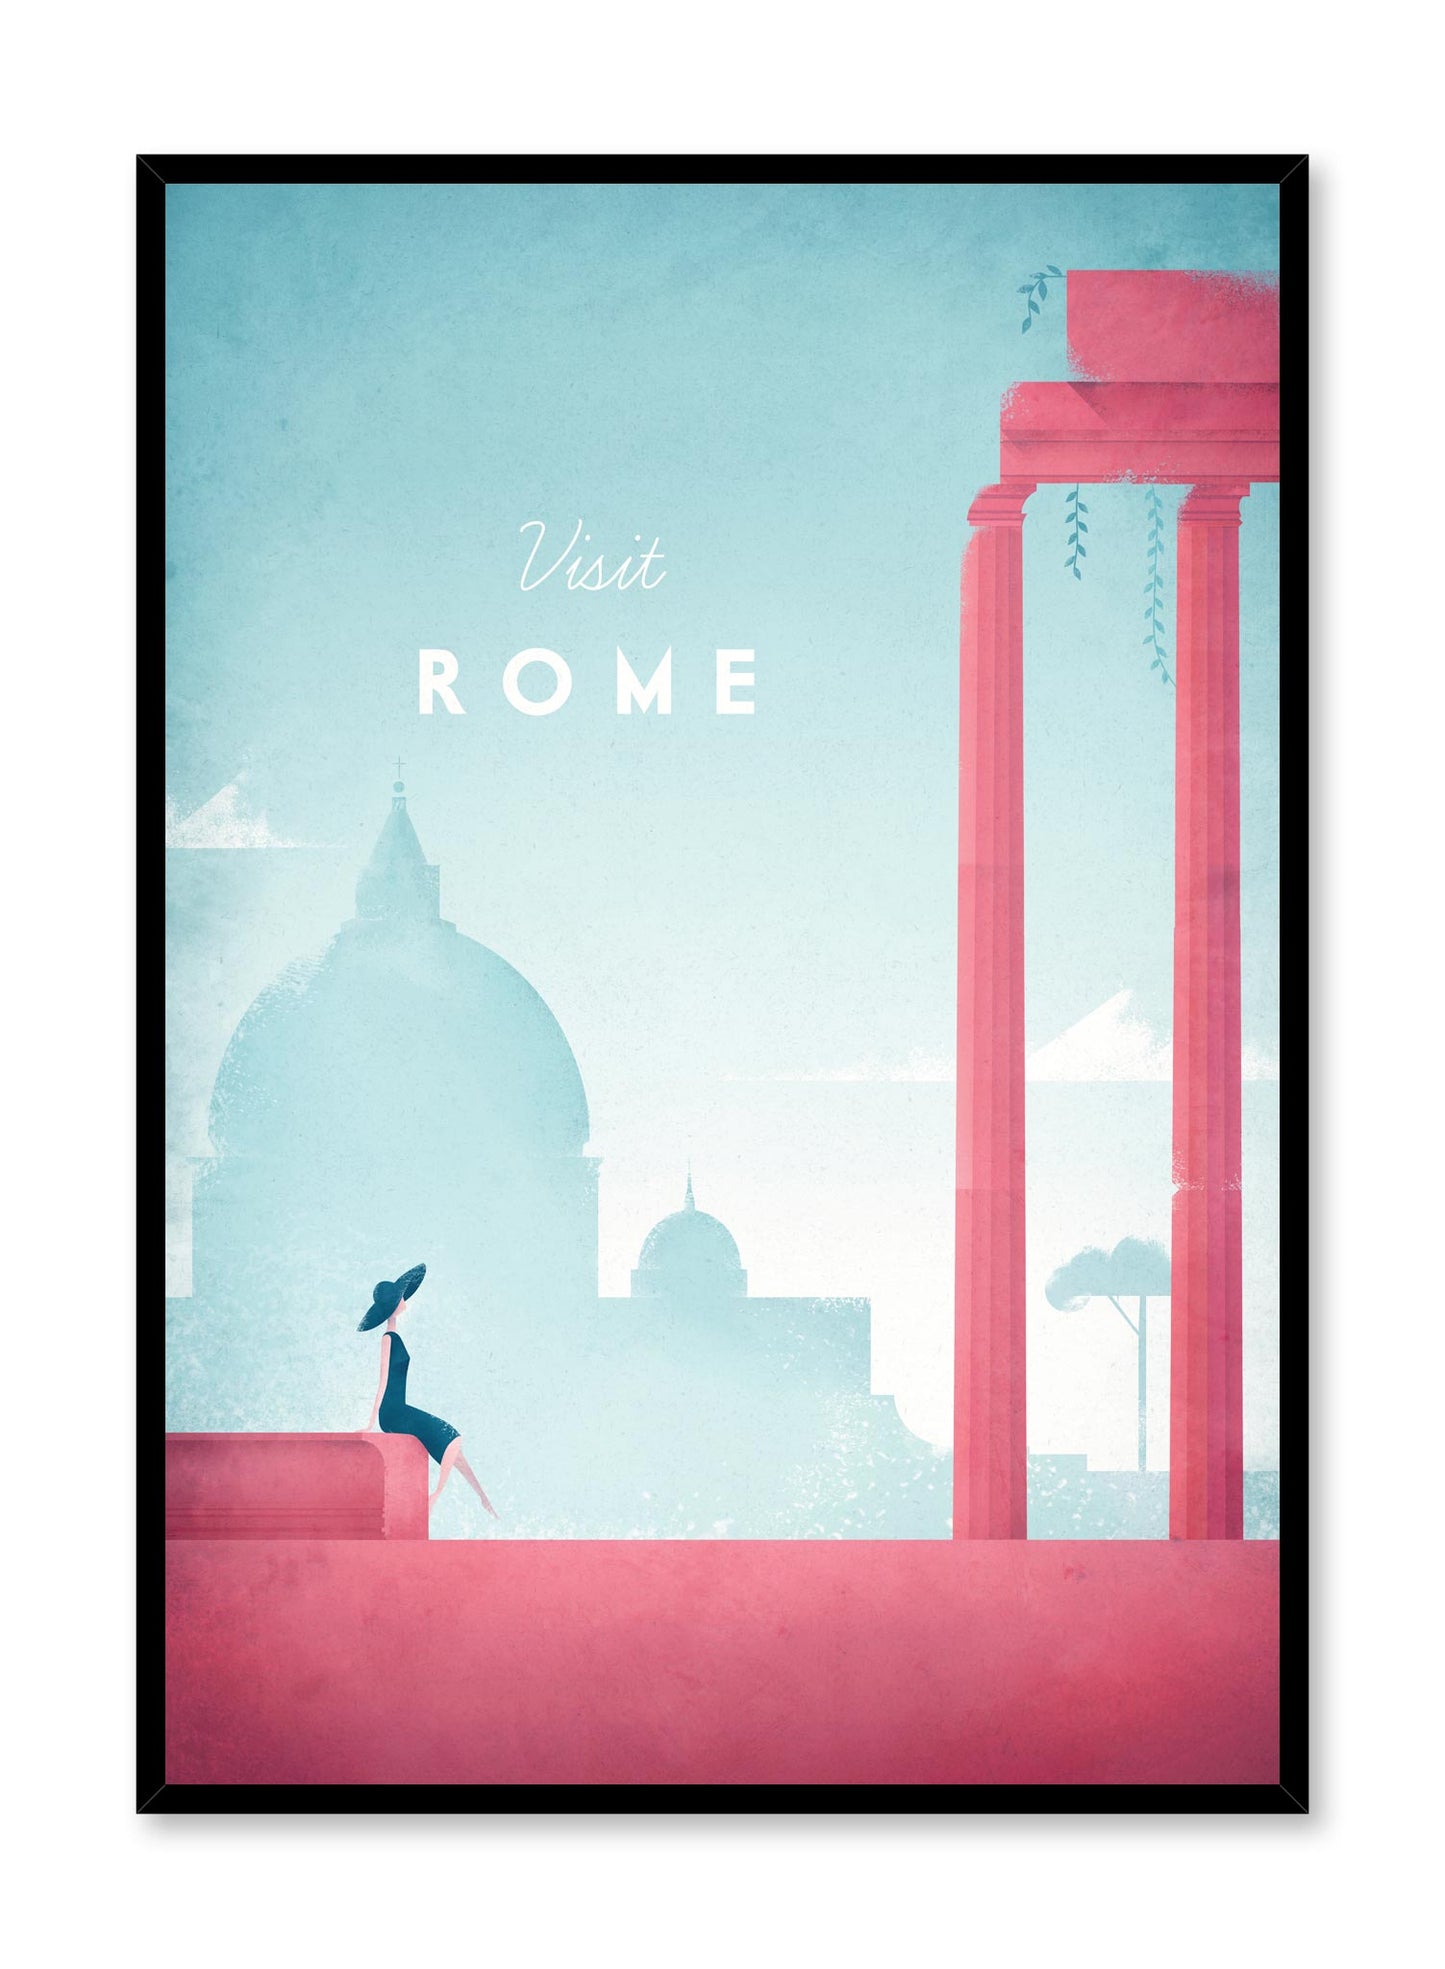 Modern minimalist travel poster by Opposite Wall with illustration of Rome